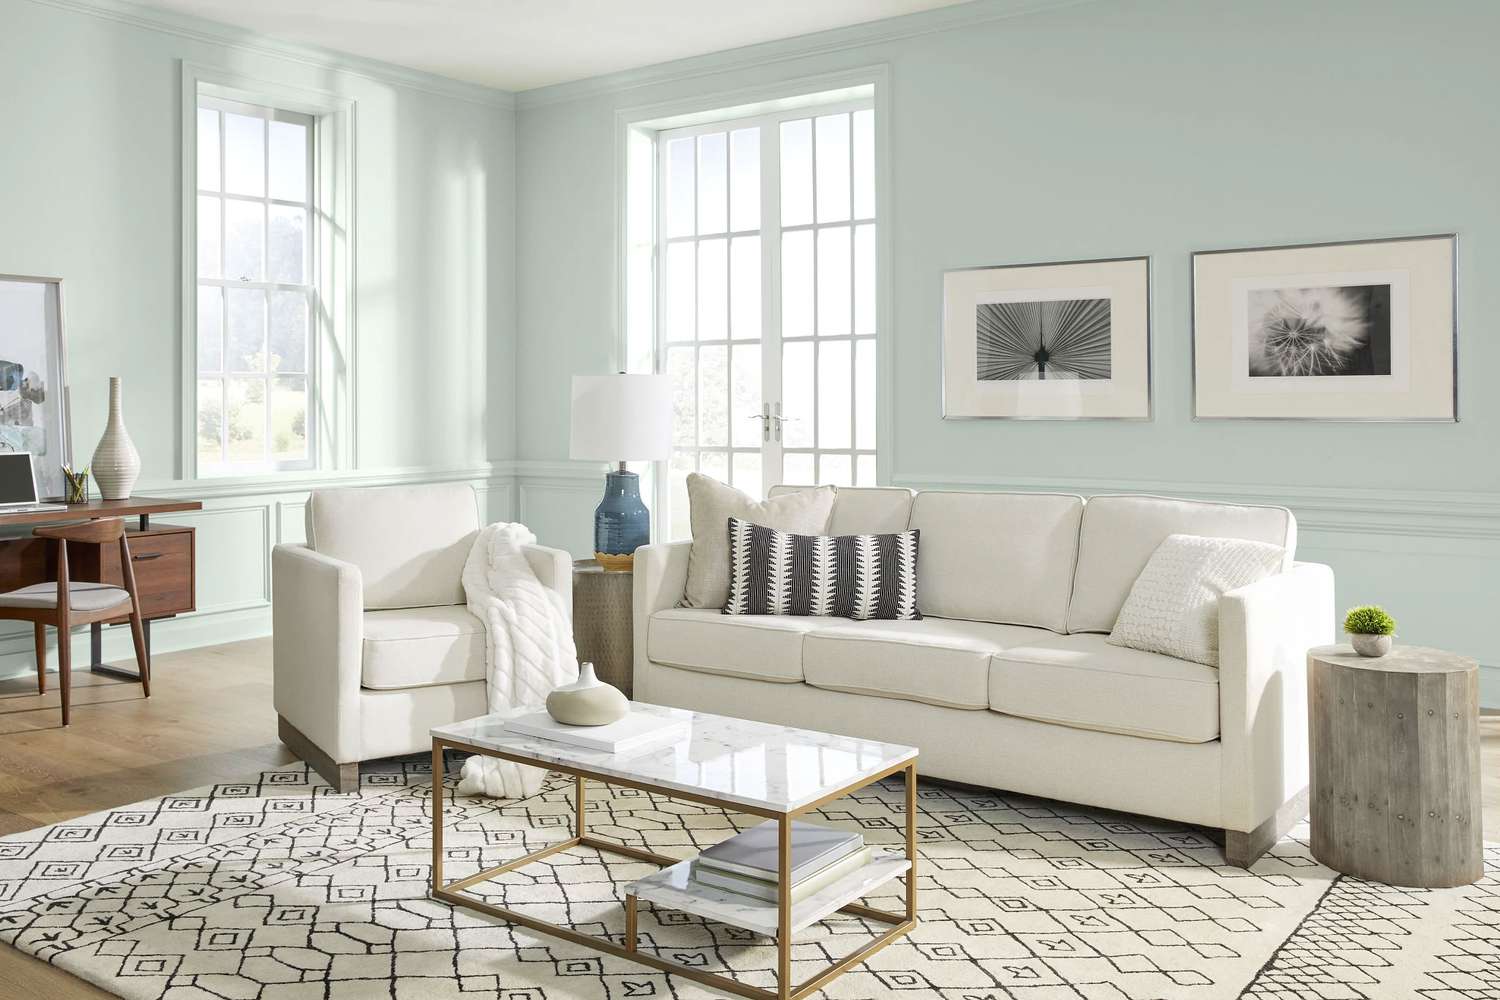 Color trend predictions 2022 - Breezeway paint by Behr in living room